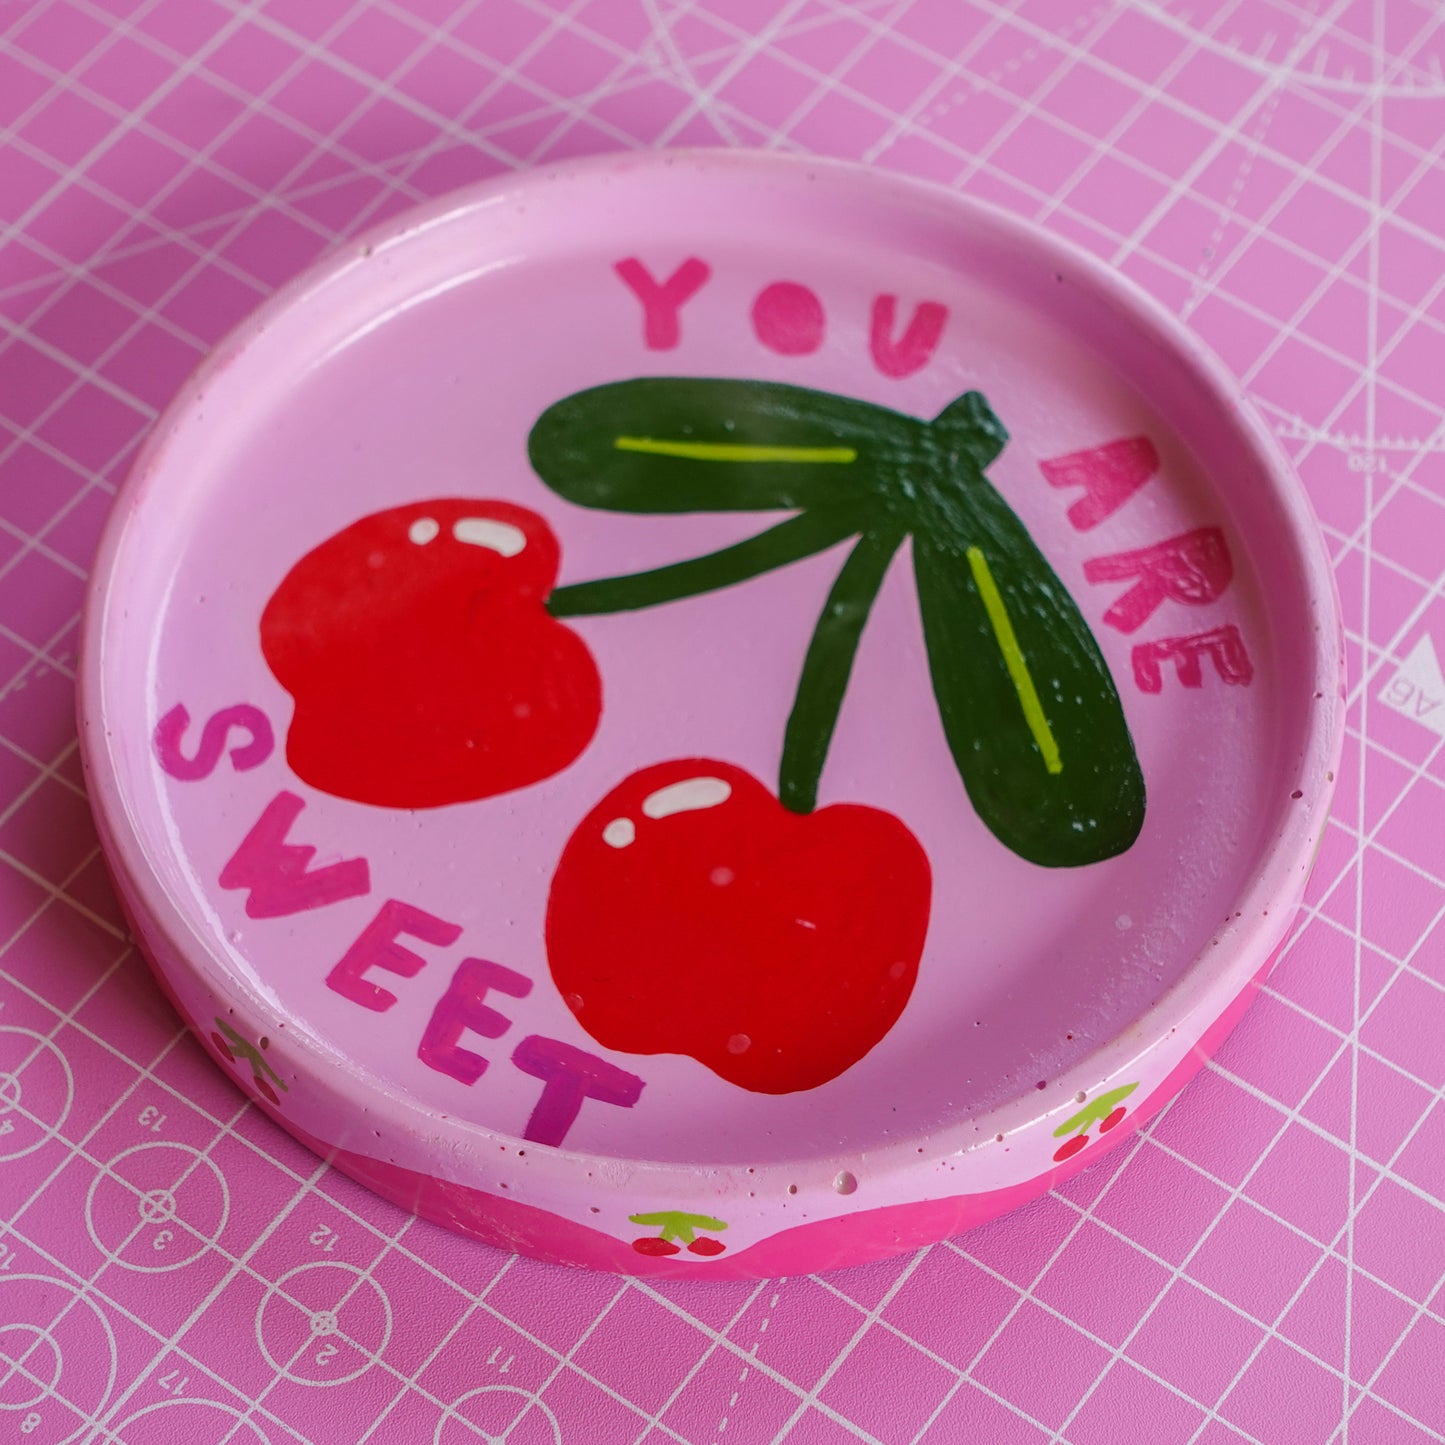 You are Sweet! Cherry Trinket Tray 🍒